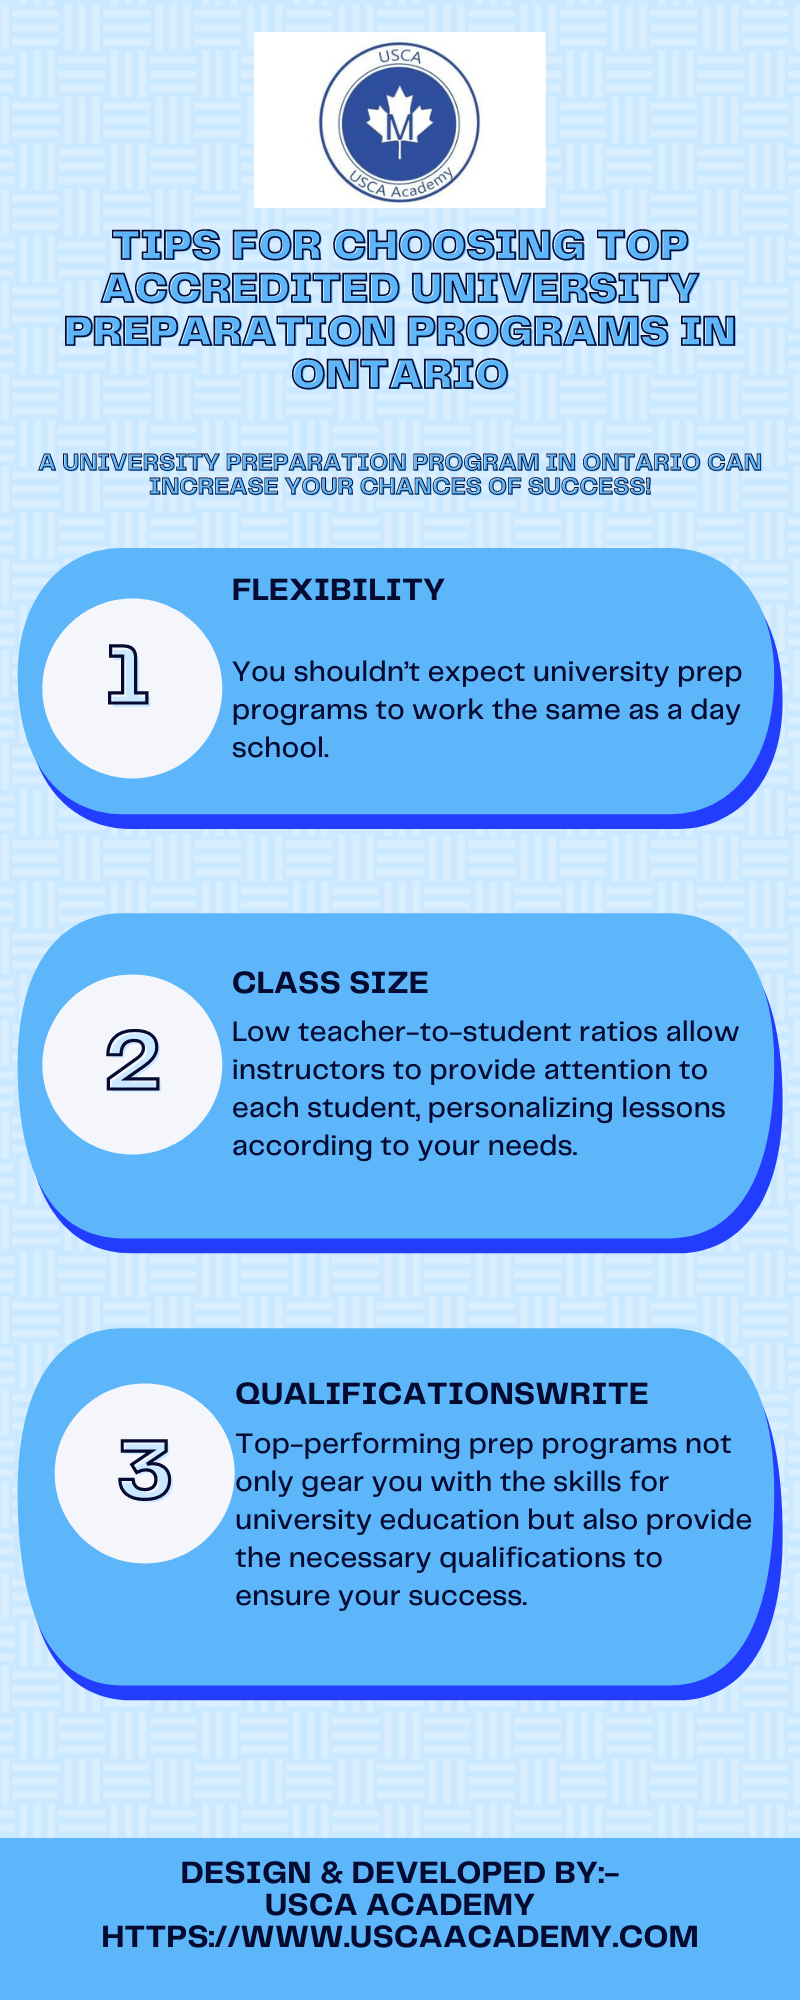 Tips for Choosing Top Accredited University Preparation Programs in Ontario.png  by uscaacademy